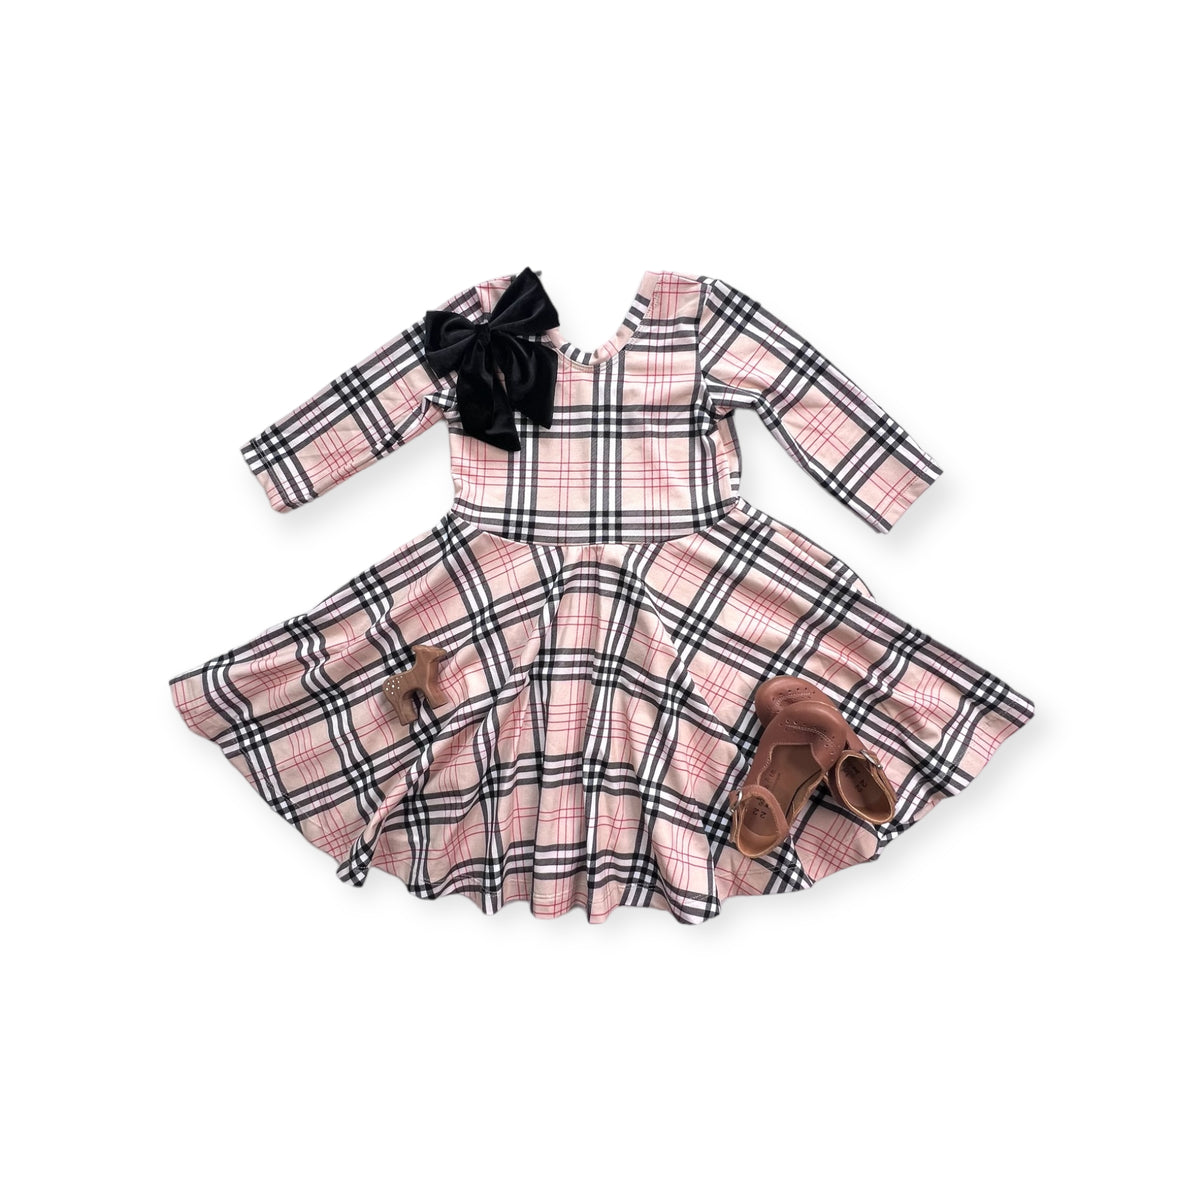 Elle Twirl Dress [3/4 Sleeve] in 'Biscotti Plaid' -Ready to Ship